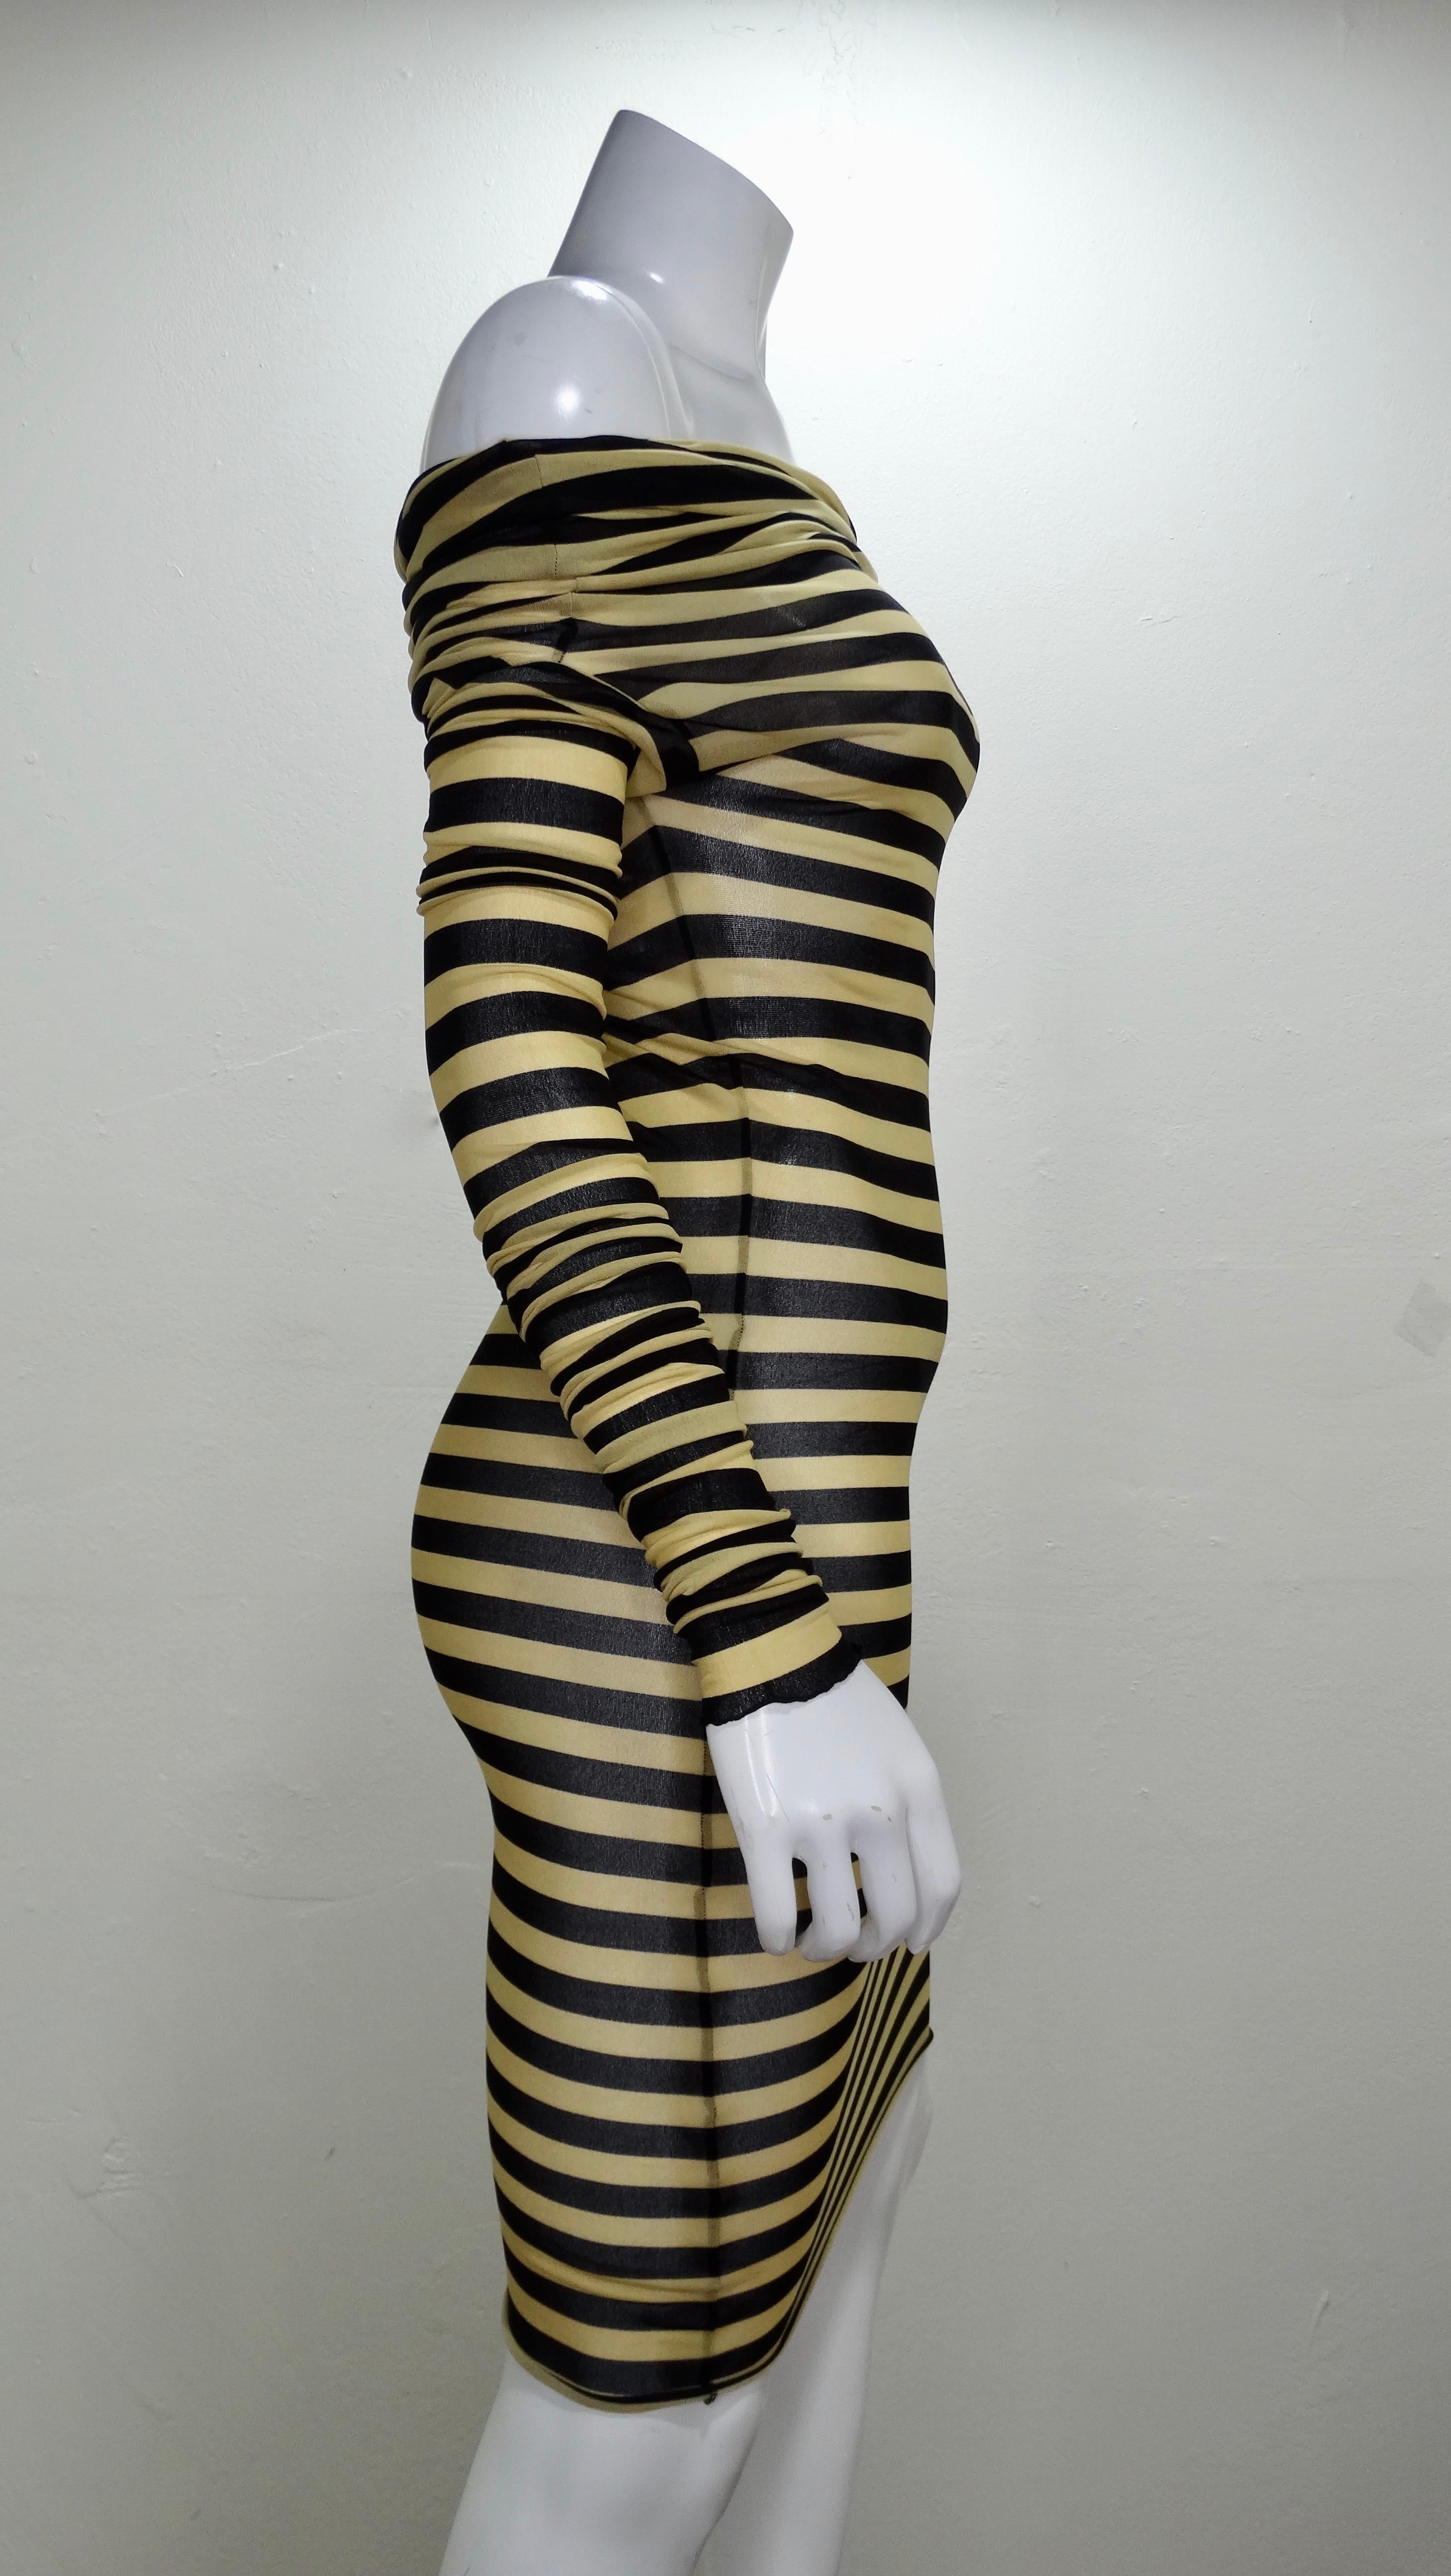 Rock an edgy look with this Jean Paul Gaultier dress! Circa 2003, this mesh dress features black and nude stripes with exaggerated long sleeves and a cowl neck. Figure hugging and extremely flattering, wear slightly off the shoulder with your